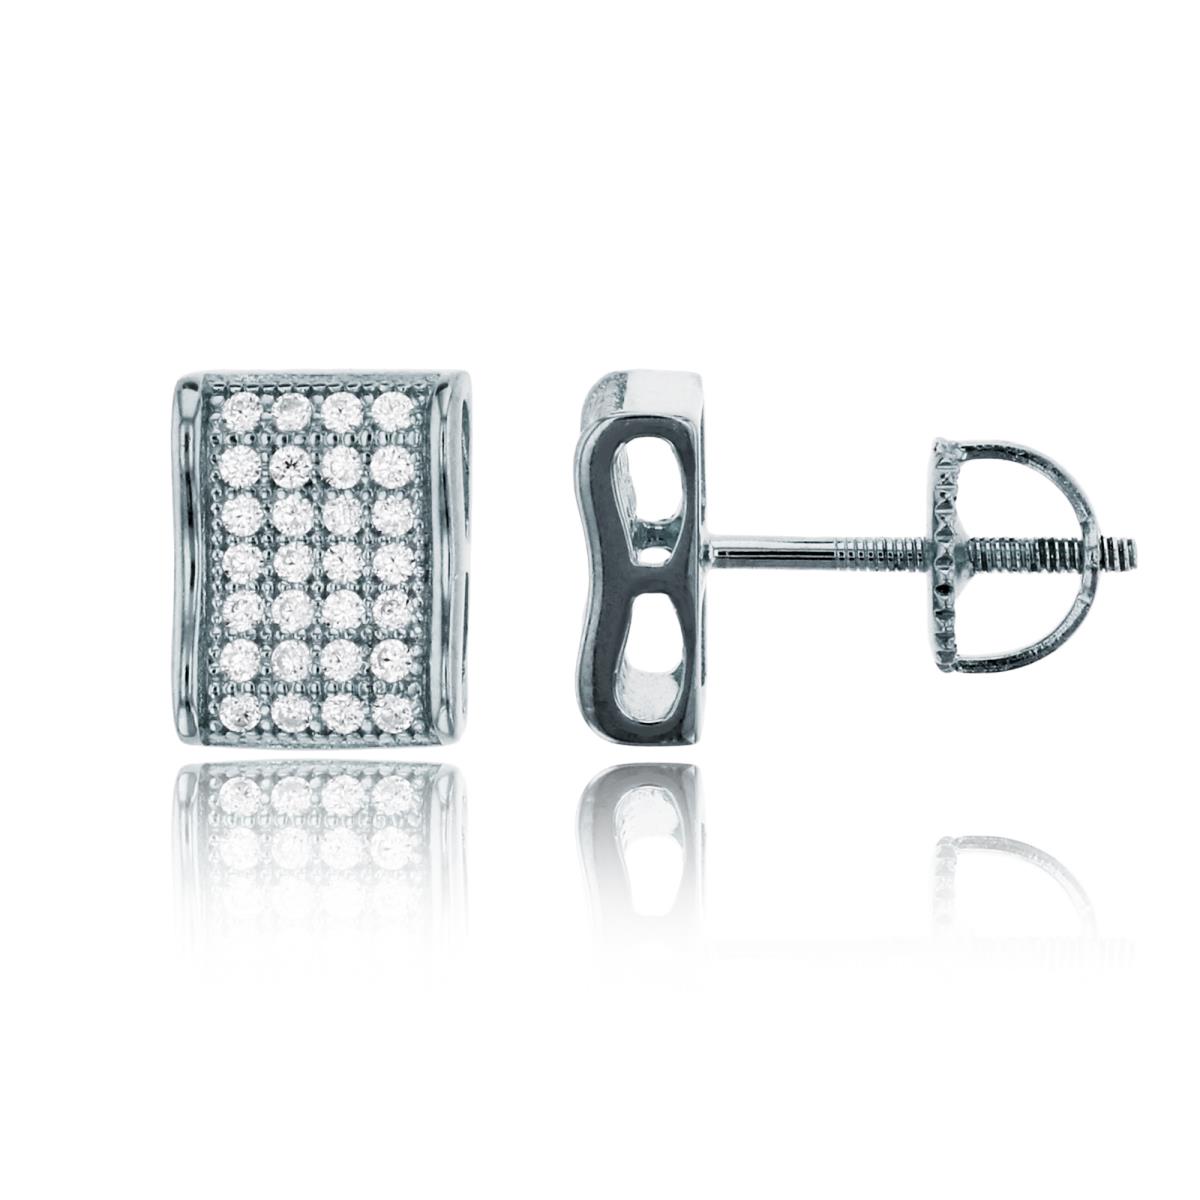 Sterling Silver Rhodium Pave 8x7mm Rectangle Screw Back Stud Earring